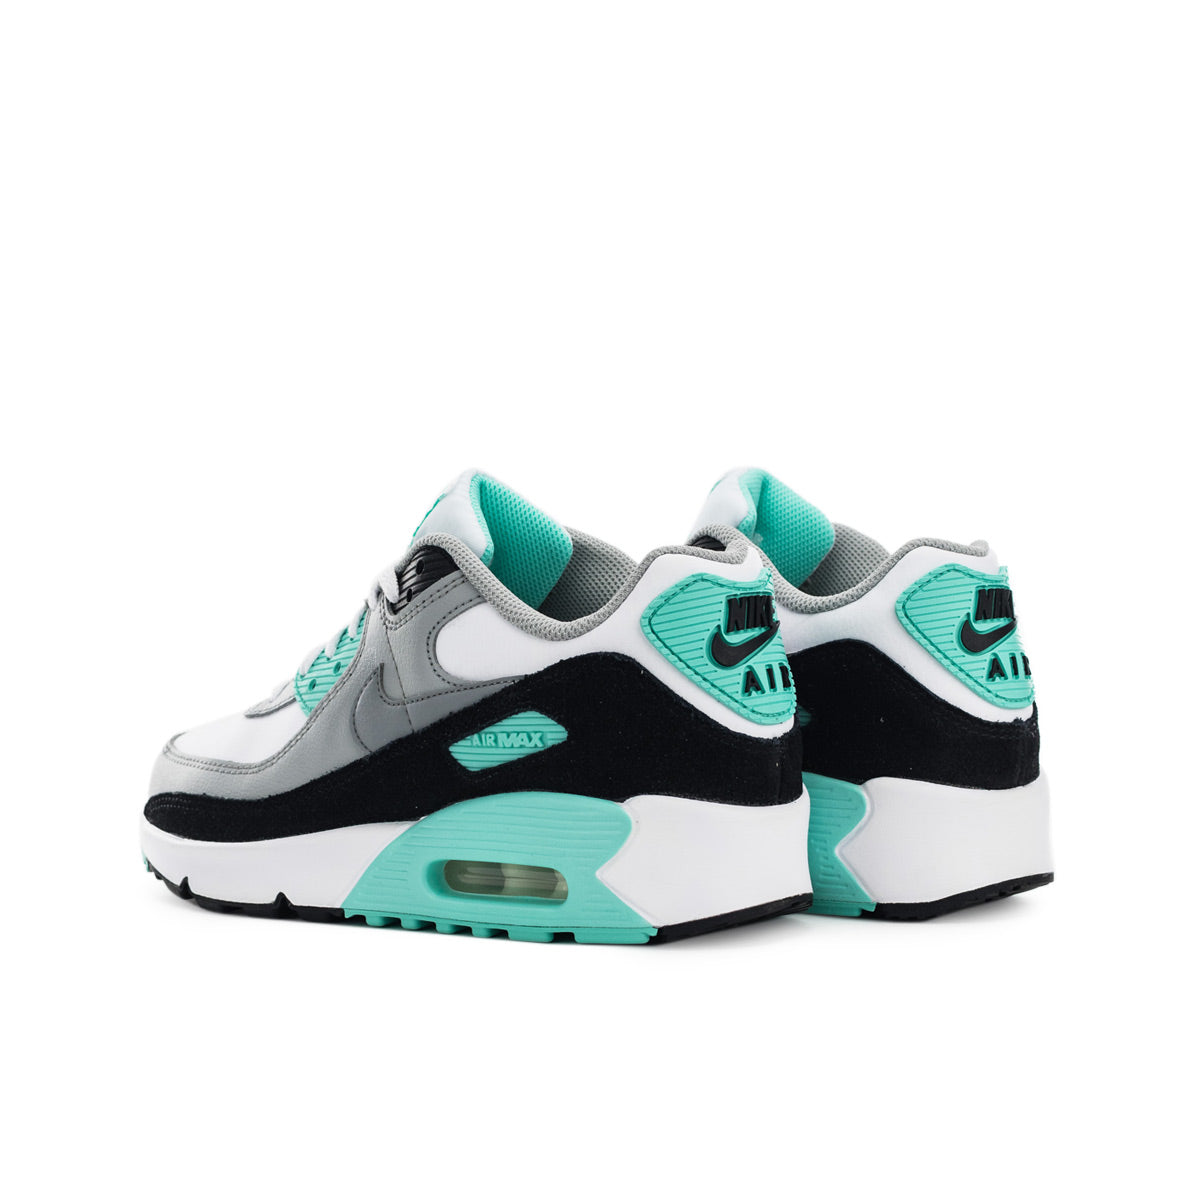 Nike Air Max 90 Leather (GS) CD6864-102-